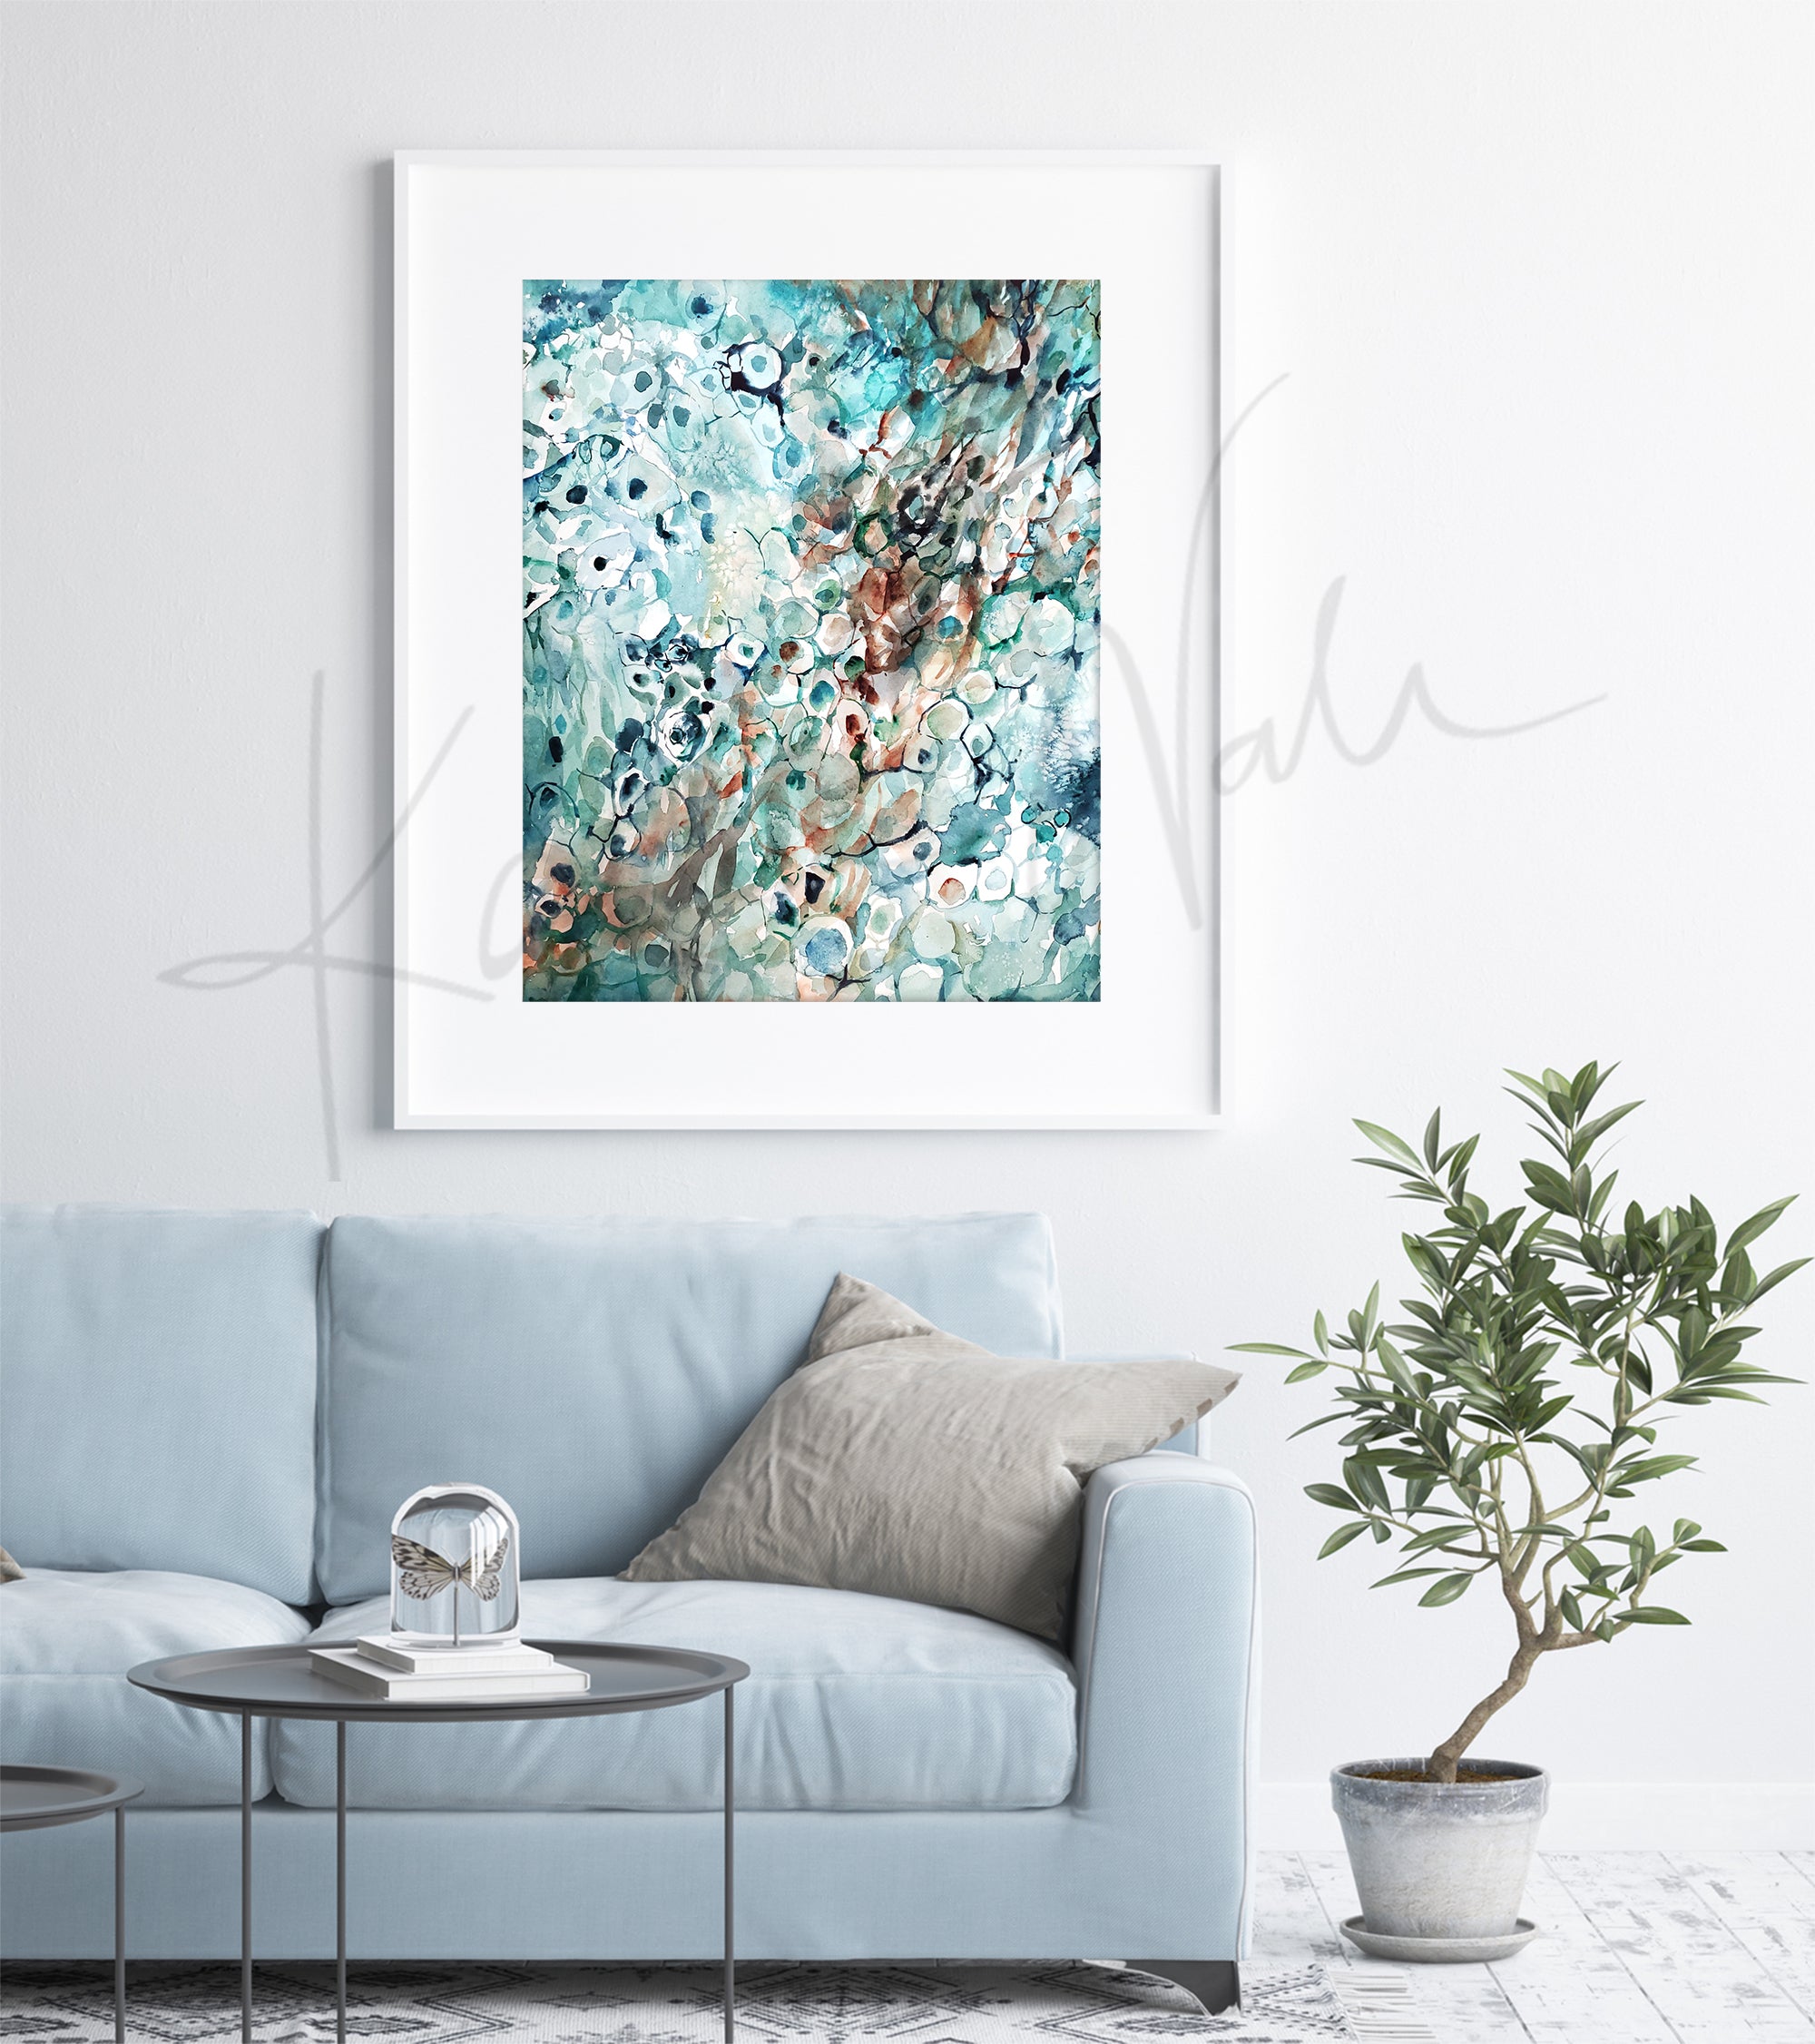 Framed watercolor painting of a histological portrait of melanoma. The painting is hanging over a blue couch.